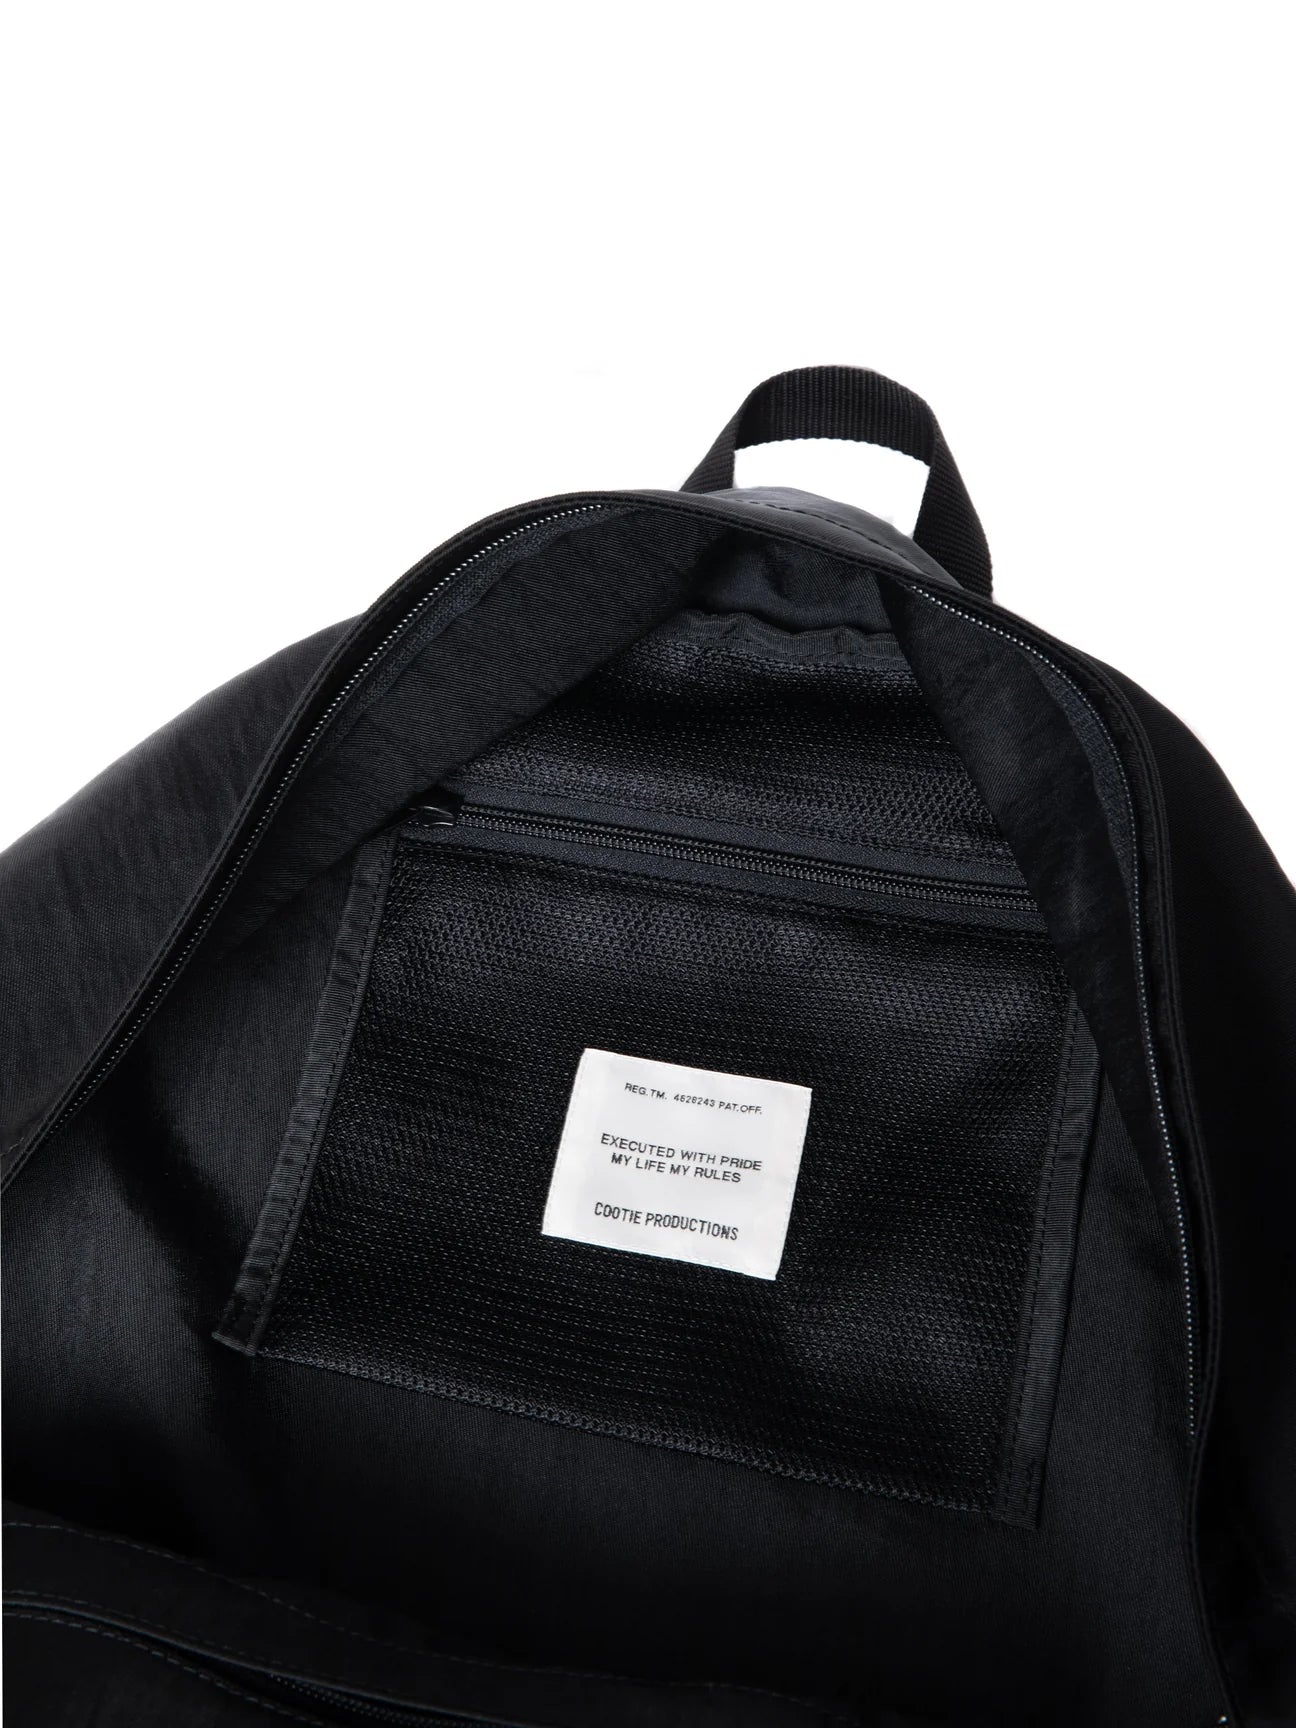 COOTIE PRODUCTIONS Standard Day Pack - リュック